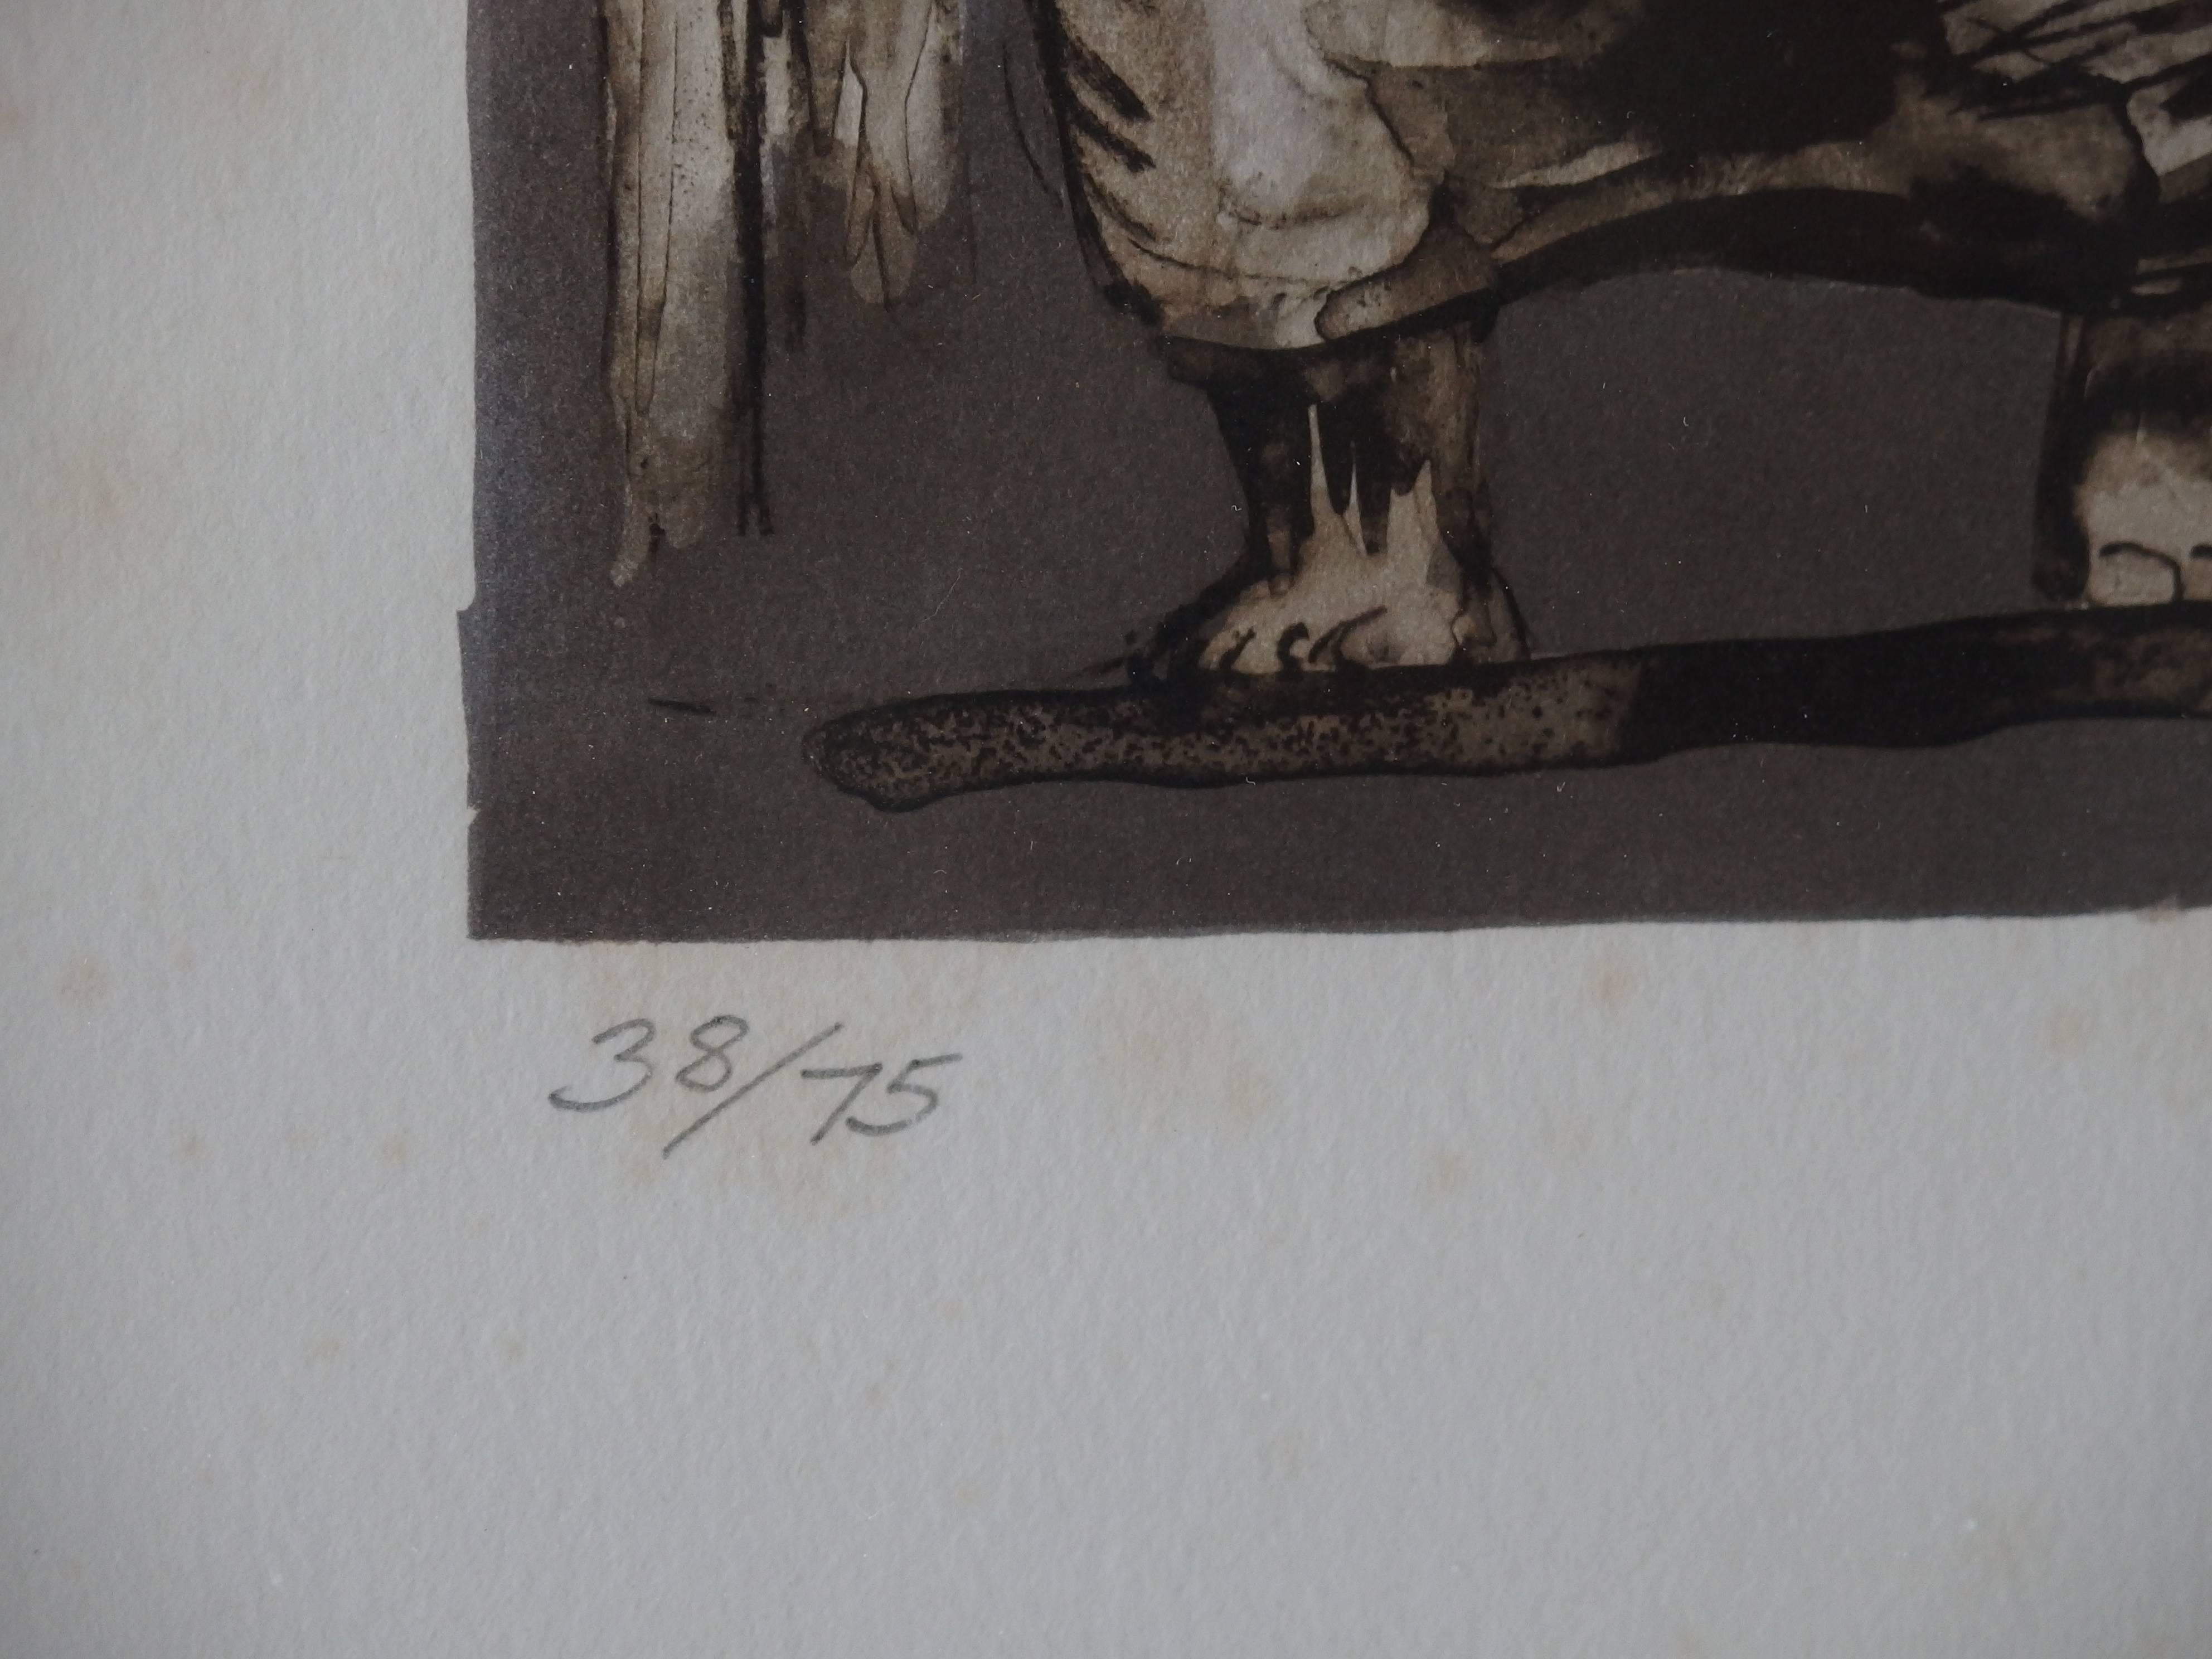 Mother and Child Studies - Original Handsigned Lithograph - 75 copies - Realist Print by Henry Moore